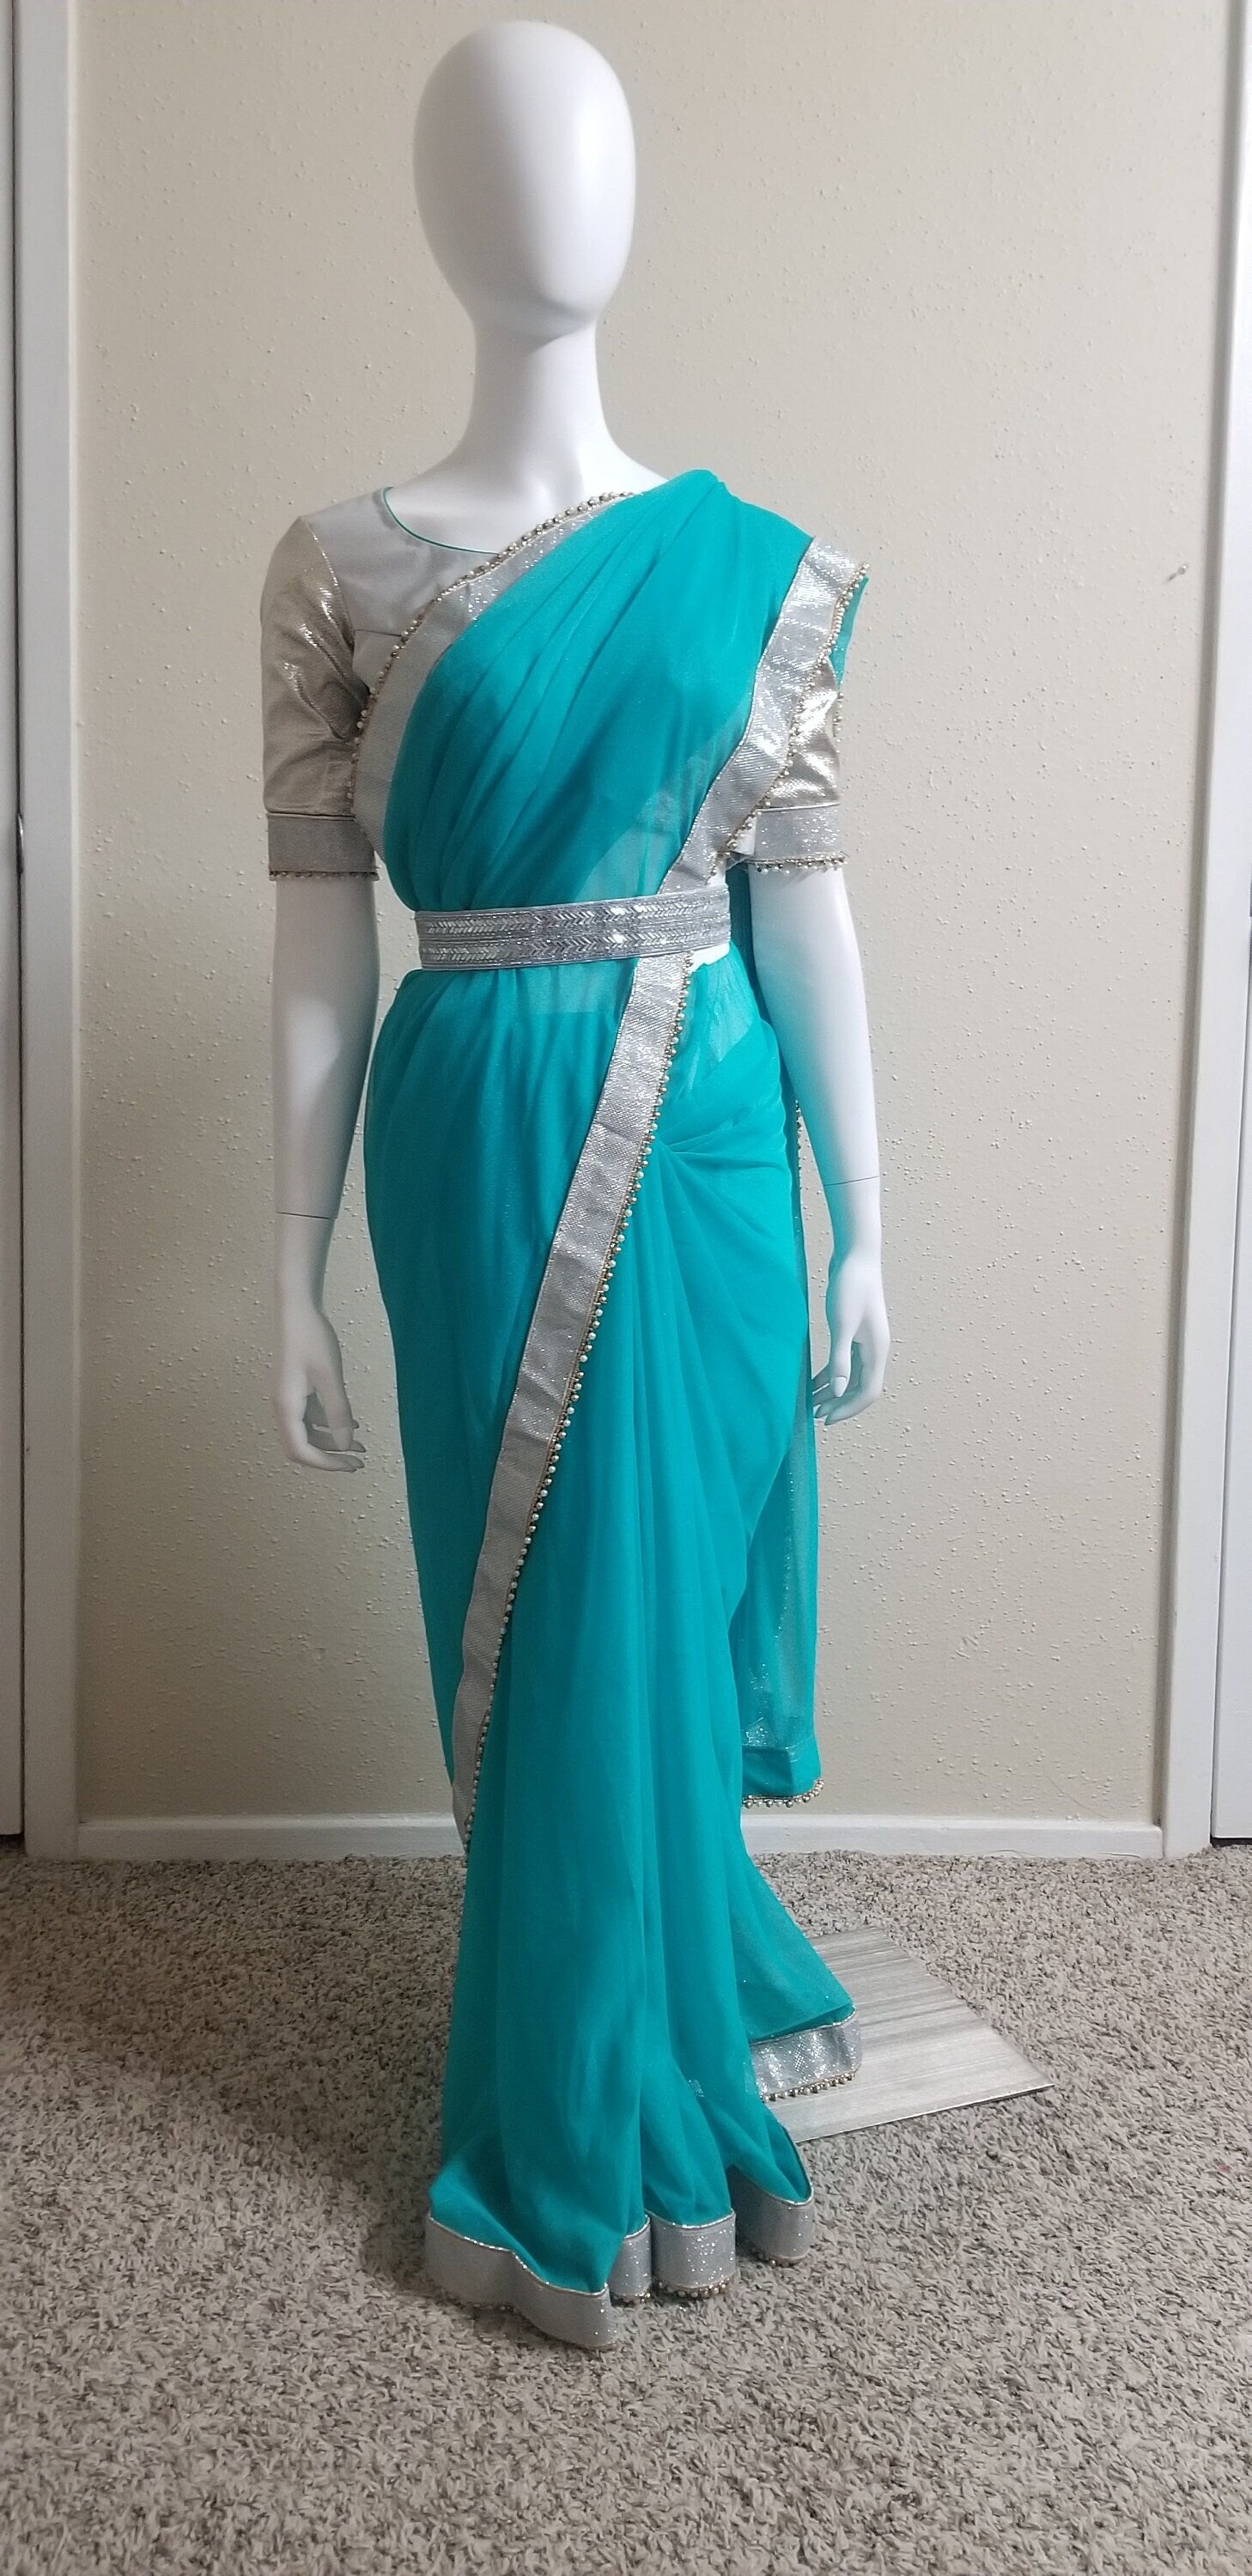 Designer Teel green Color Saree with silver jari border and stitched Silver color Blouse - Blouse 38" (Upto 42)